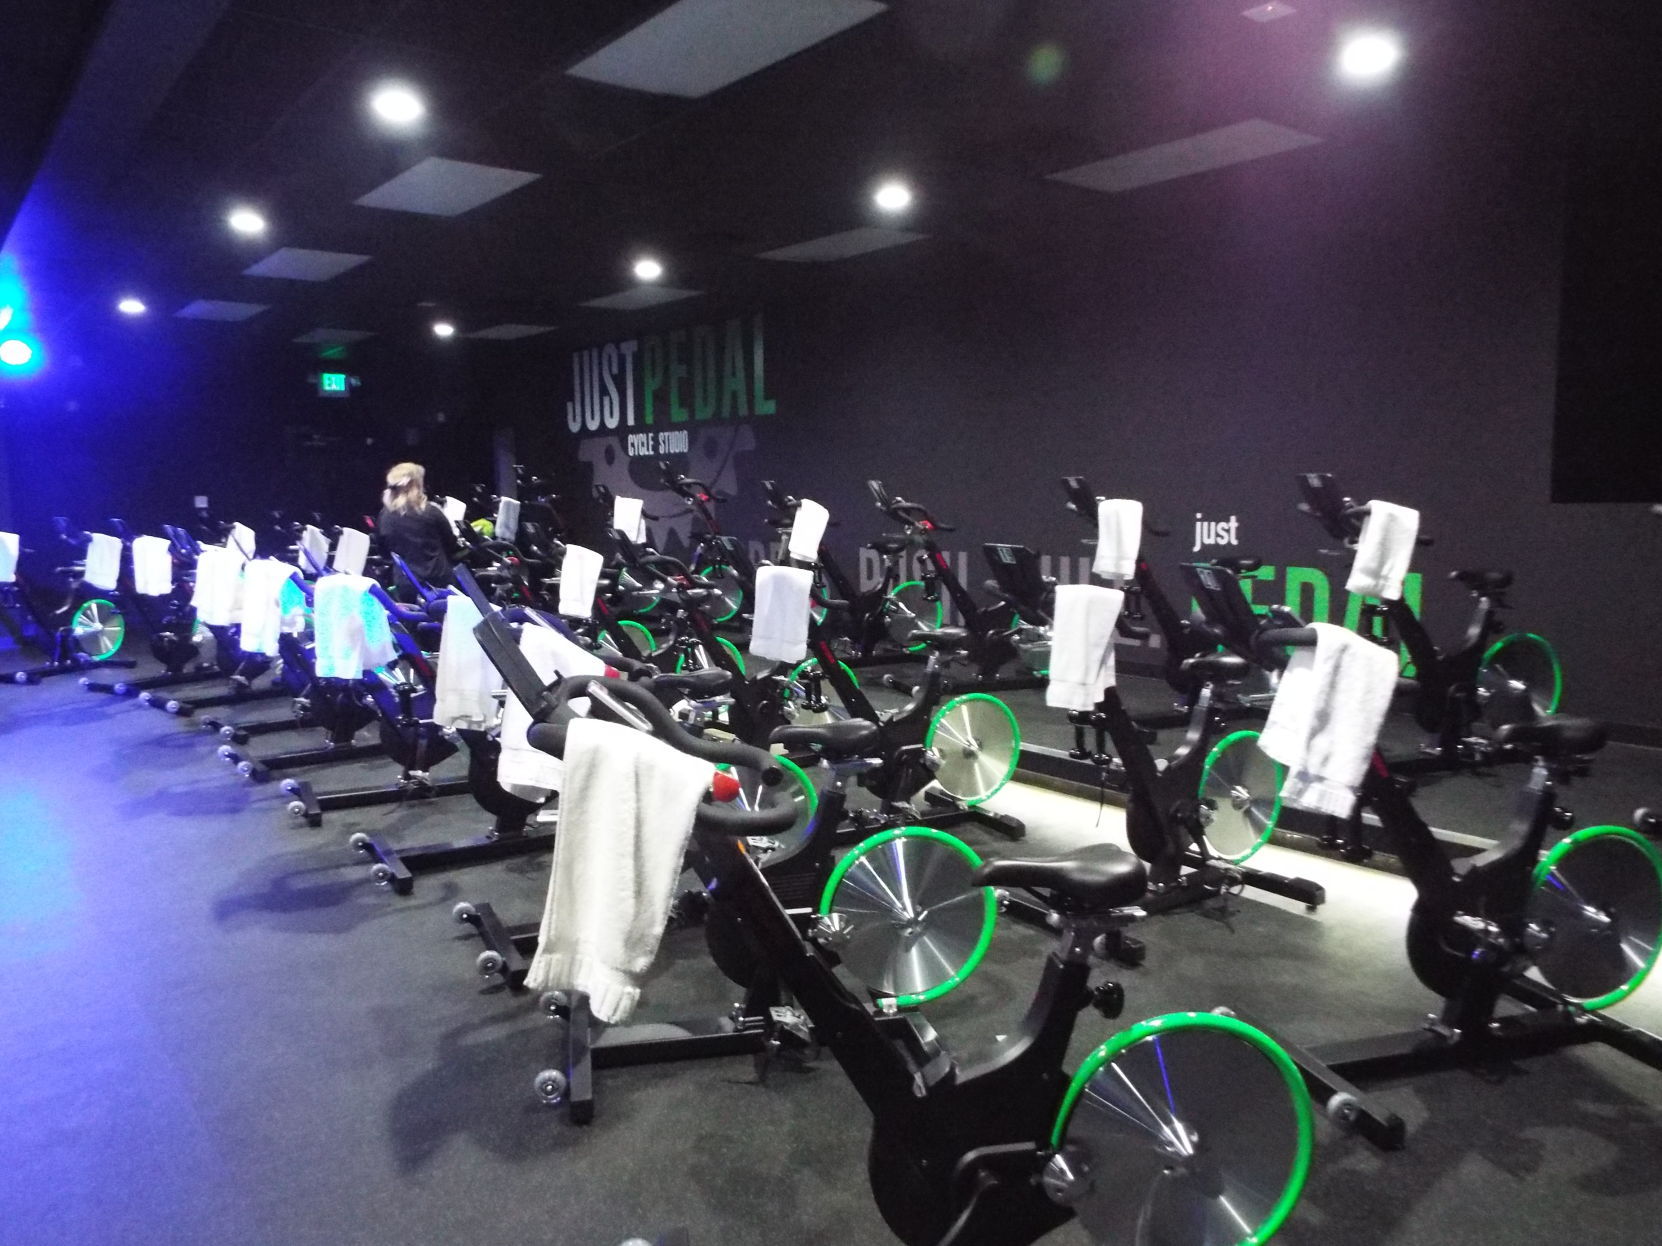 New cycling studio in Highland offers 